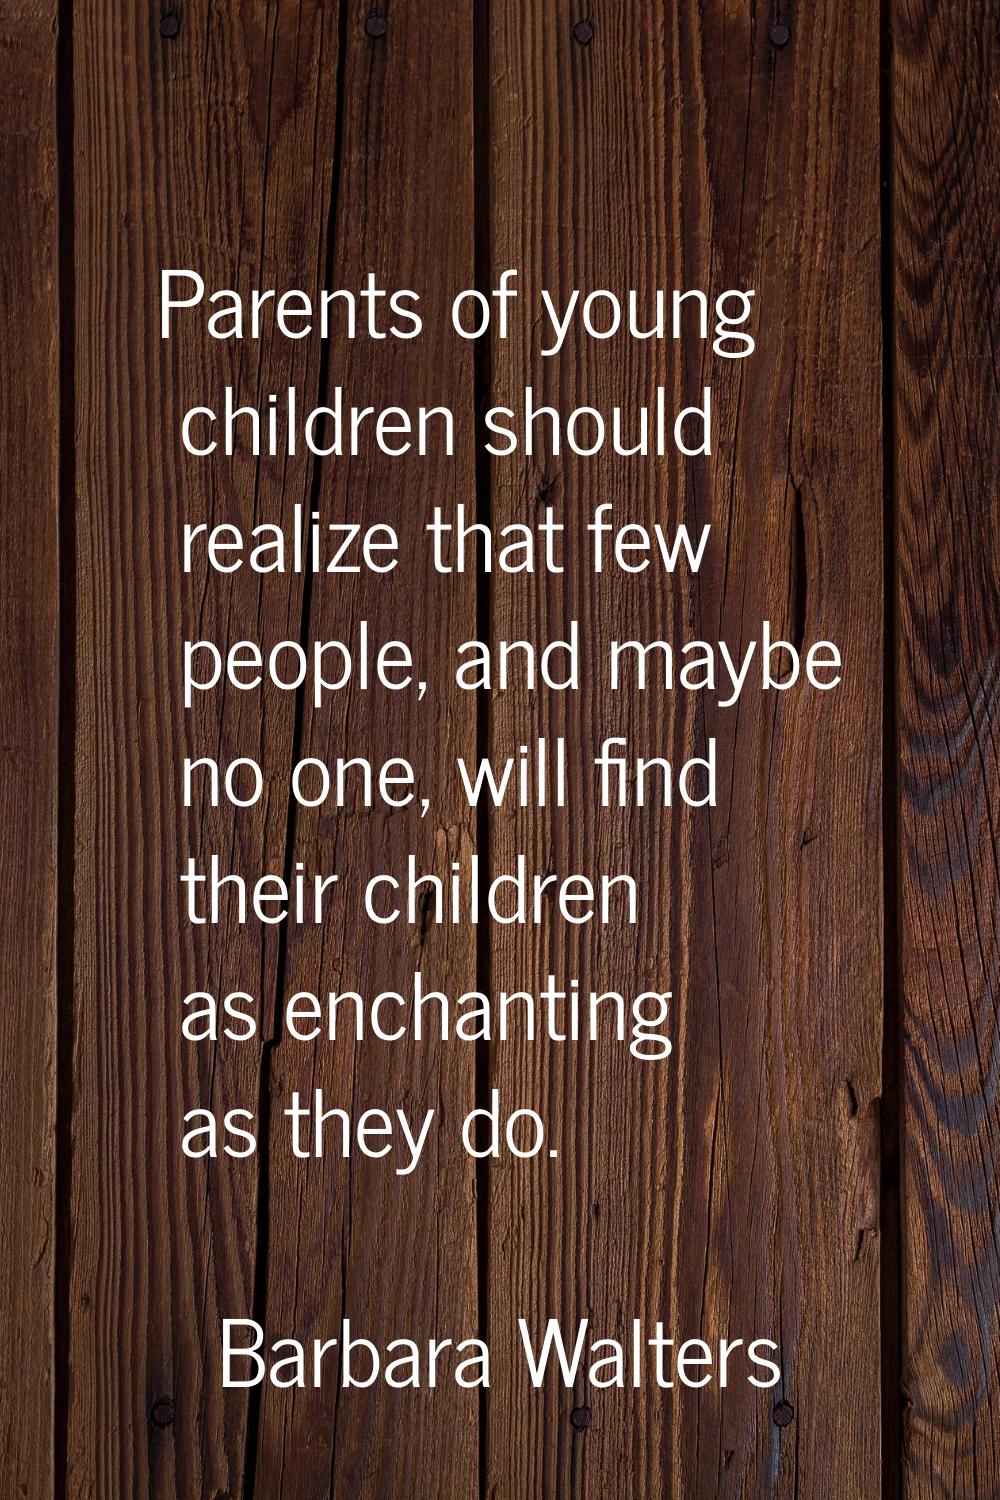 Parents of young children should realize that few people, and maybe no one, will find their childre